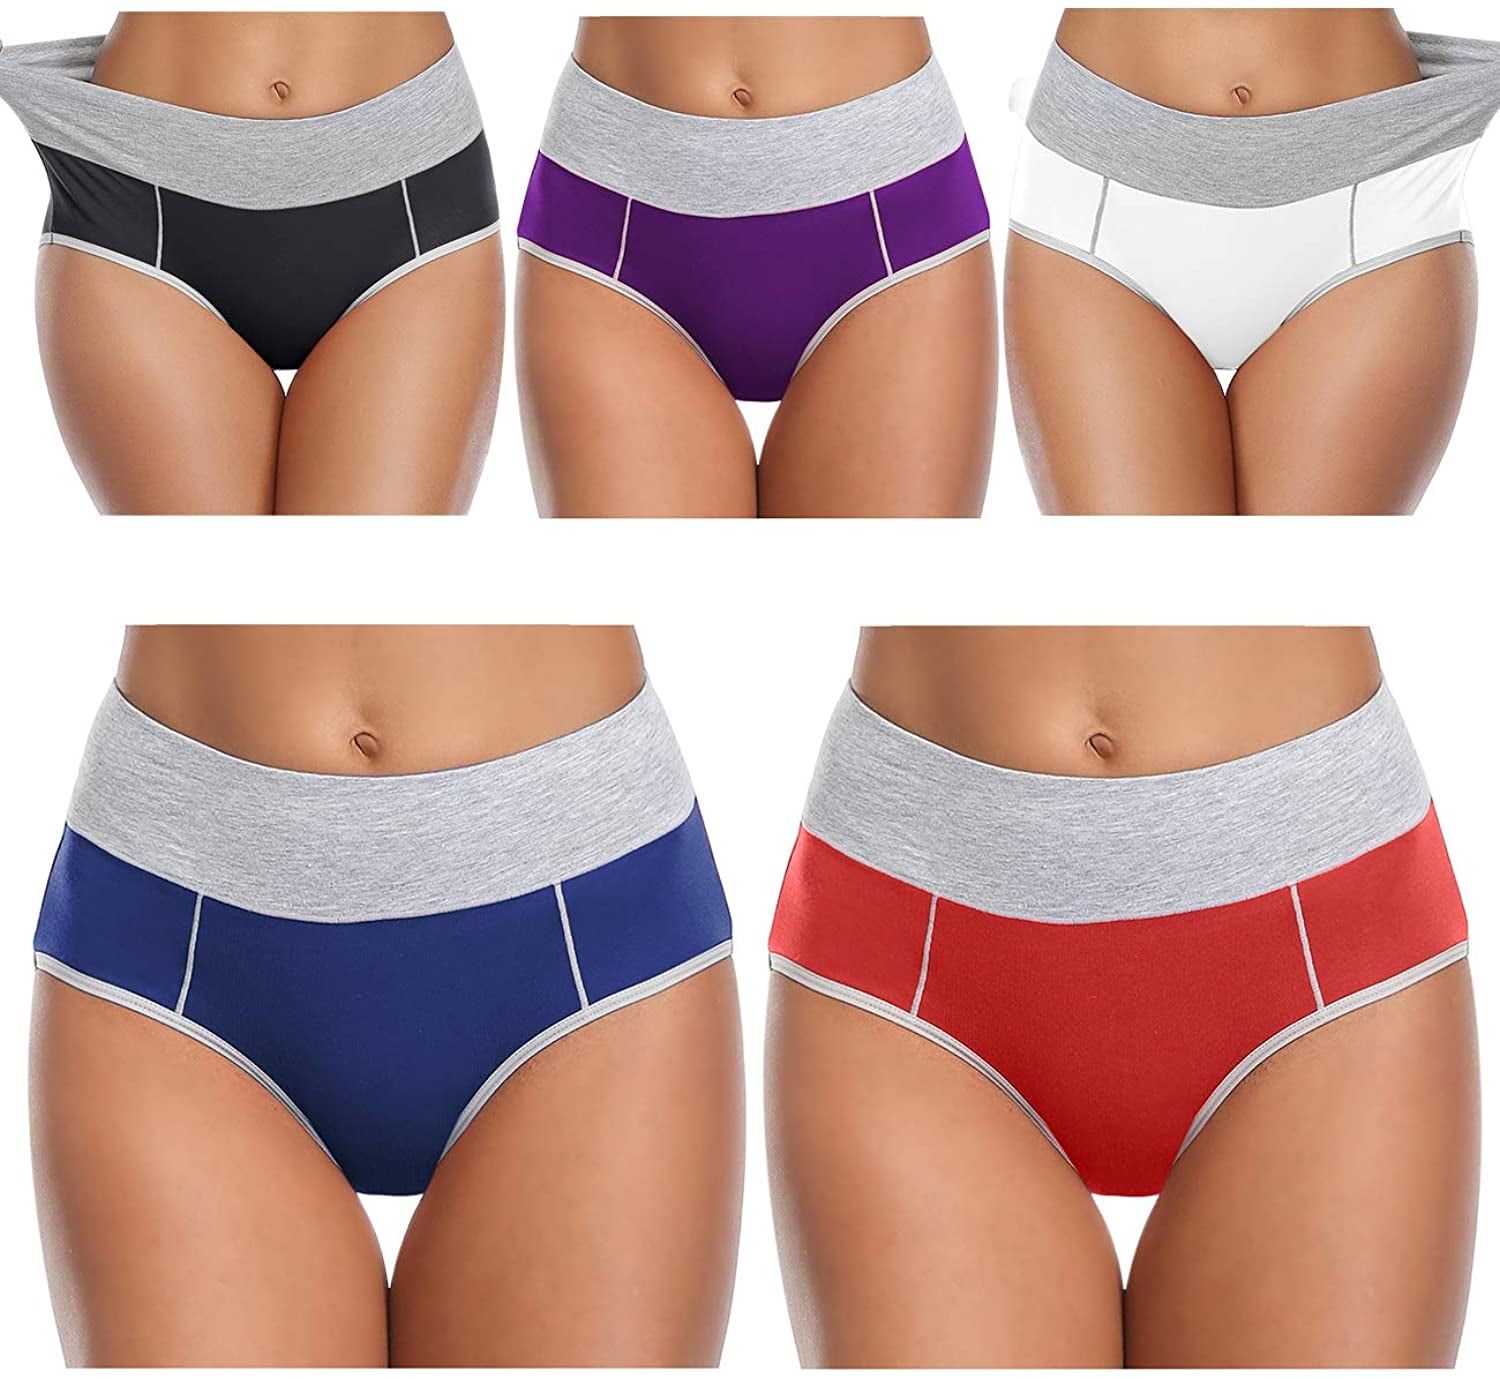 Women's Underwear High Waisted Cotton Panties Soft Stretch Breathable Briefs 5-Pack 